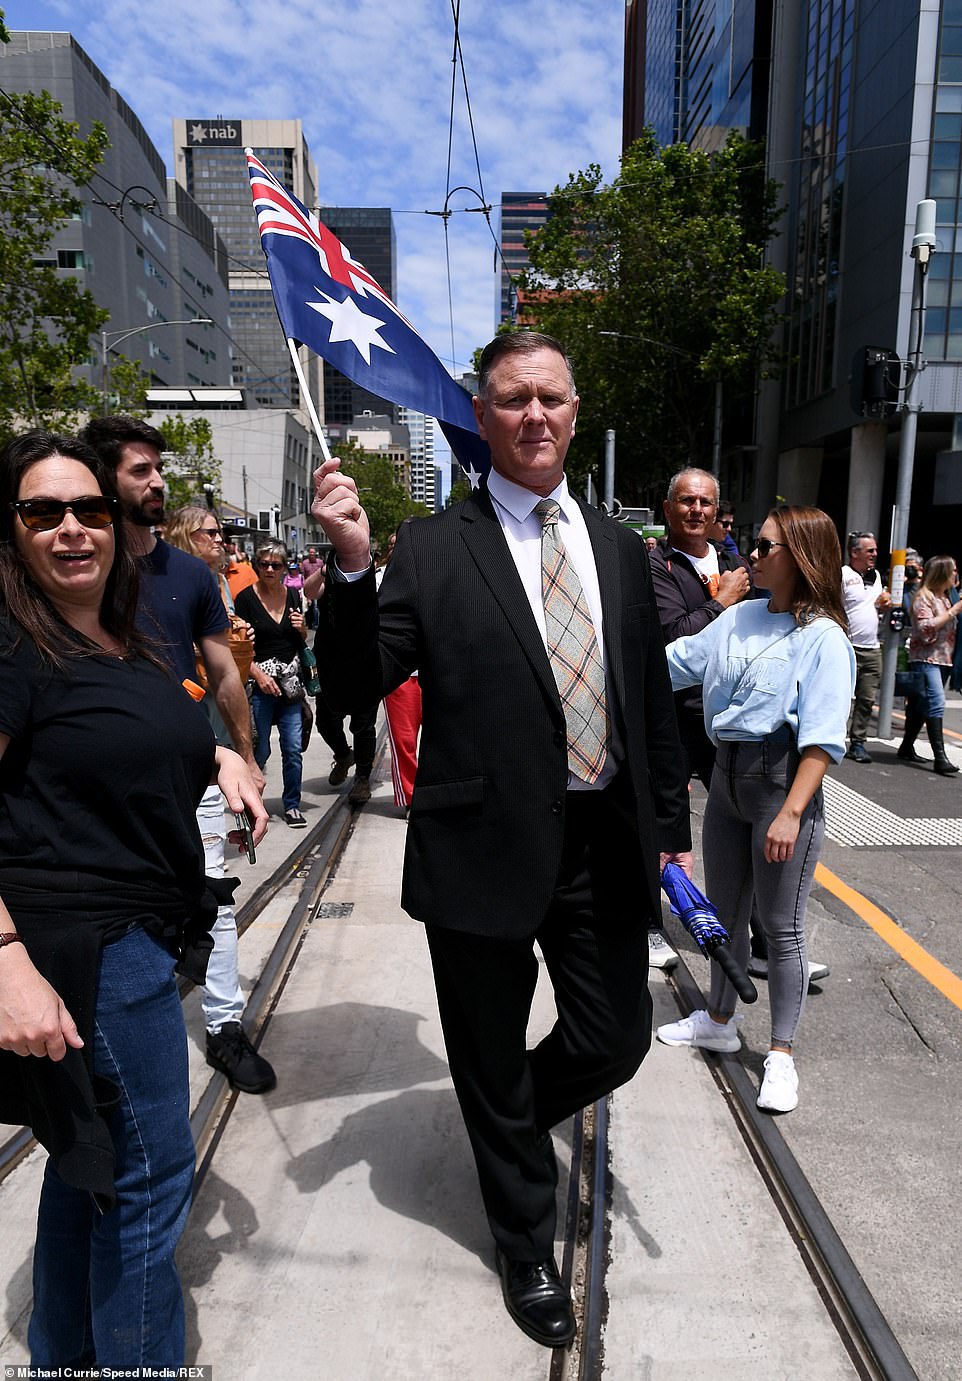 A well dressed protester wearing a suit was spotted amid the crowd during protests in the Melbourne CBD on Saturday